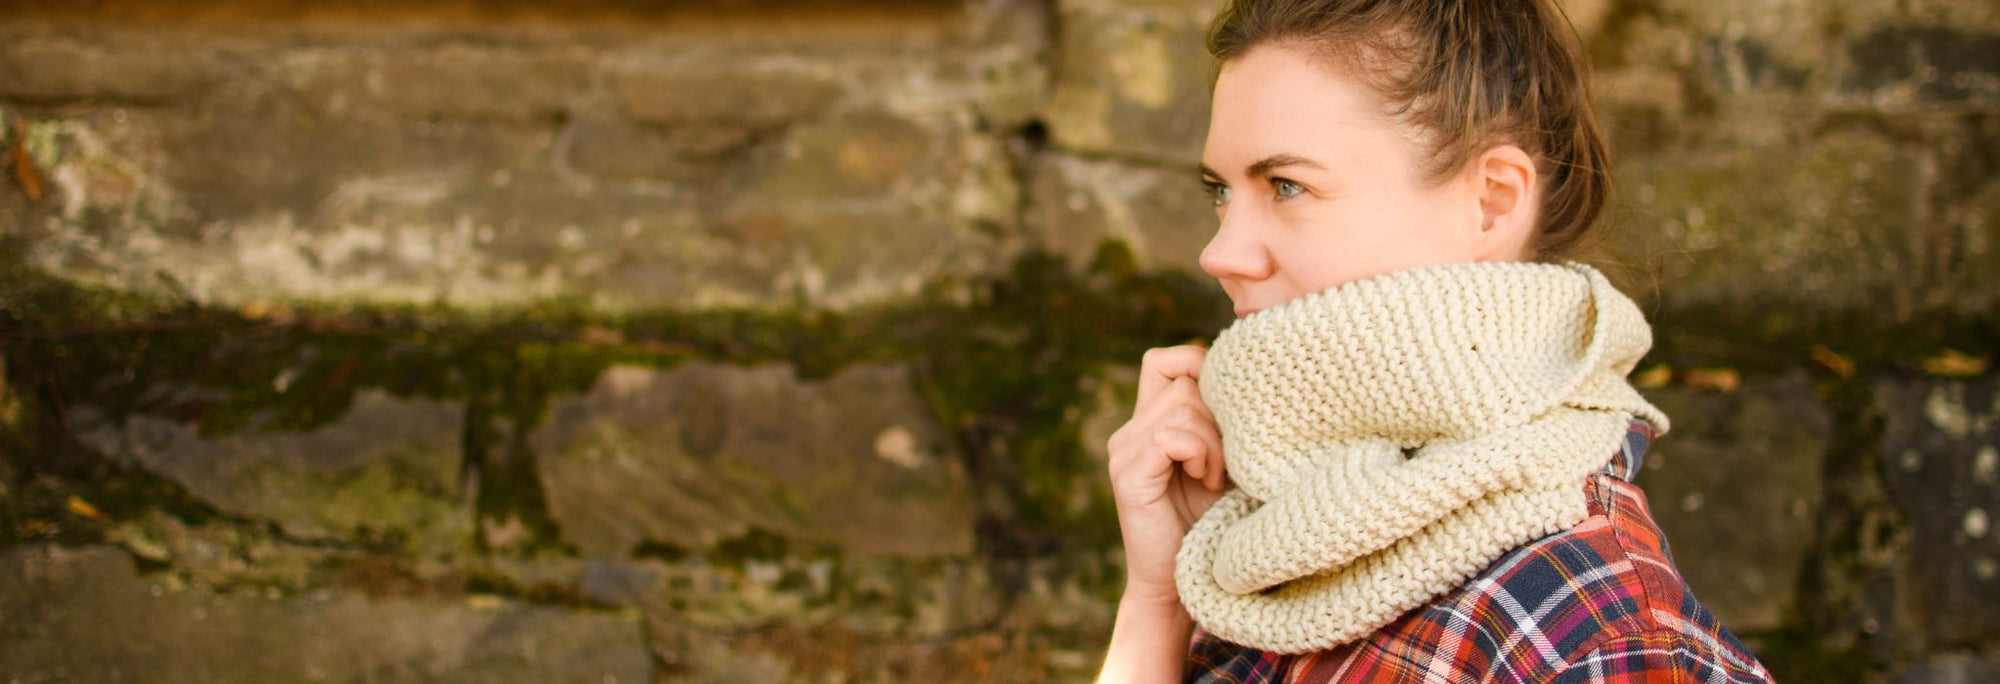 A white woman sits on the edge of a pavement with a wall behind her, she is smiling and wearing a cream coloured handknit scarf.